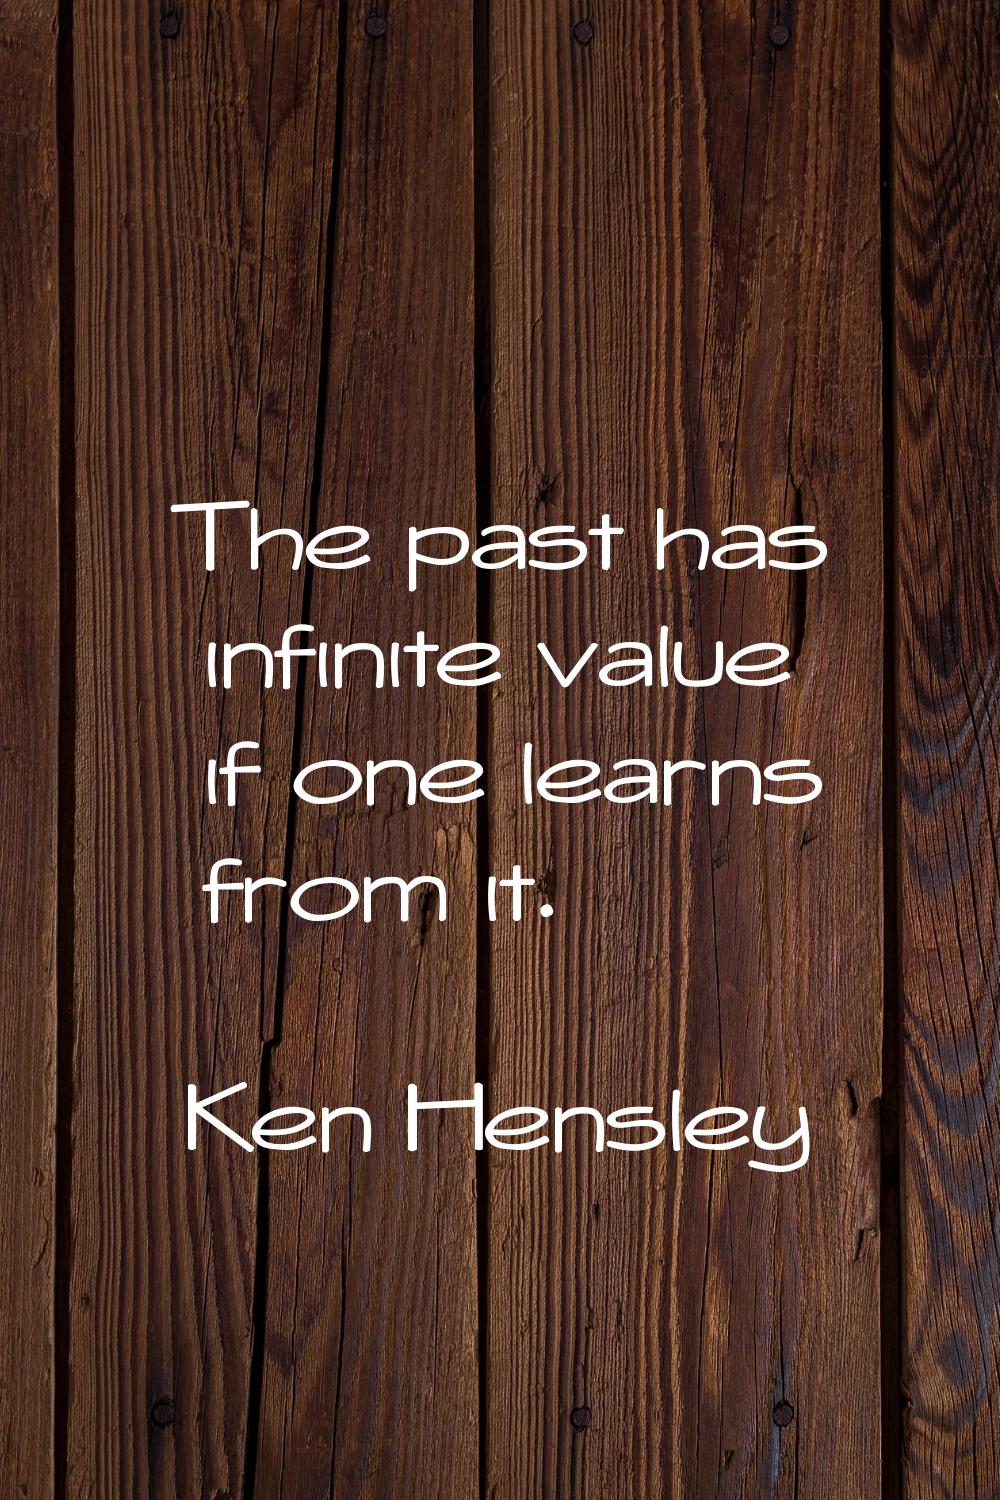 The past has infinite value if one learns from it.